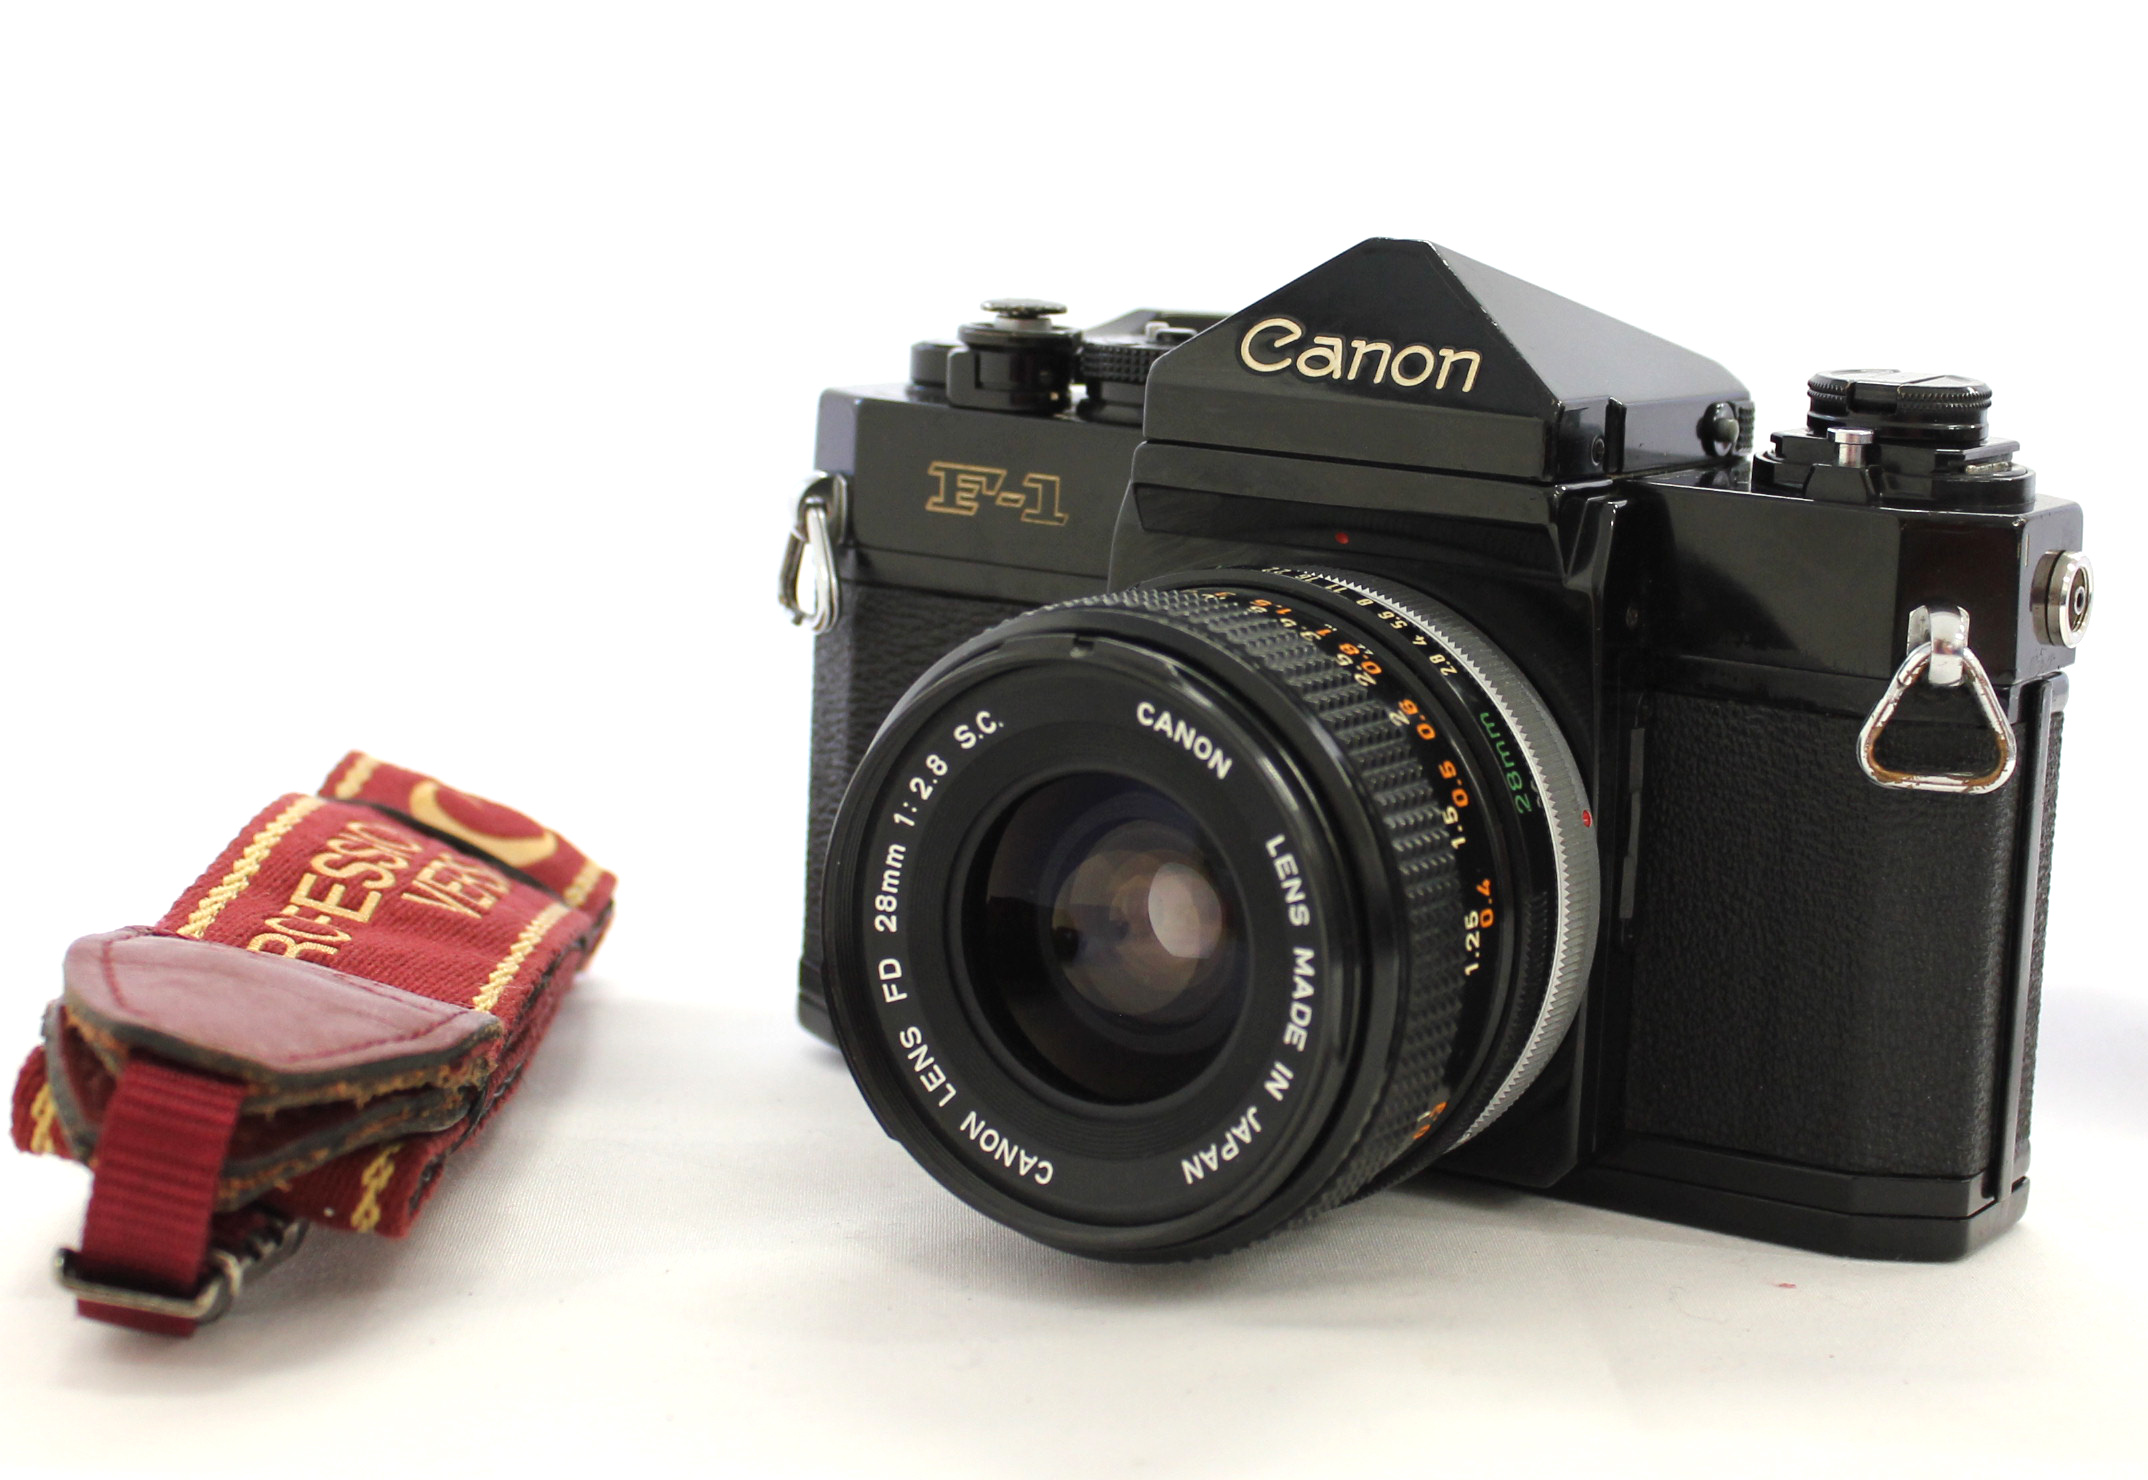 Japan Used Camera Shop | [Excellent++++] Canon F-1 Late Model 35mm SLR Film Camera with FD 28mm F/2.8 S.C. Lens from Japan